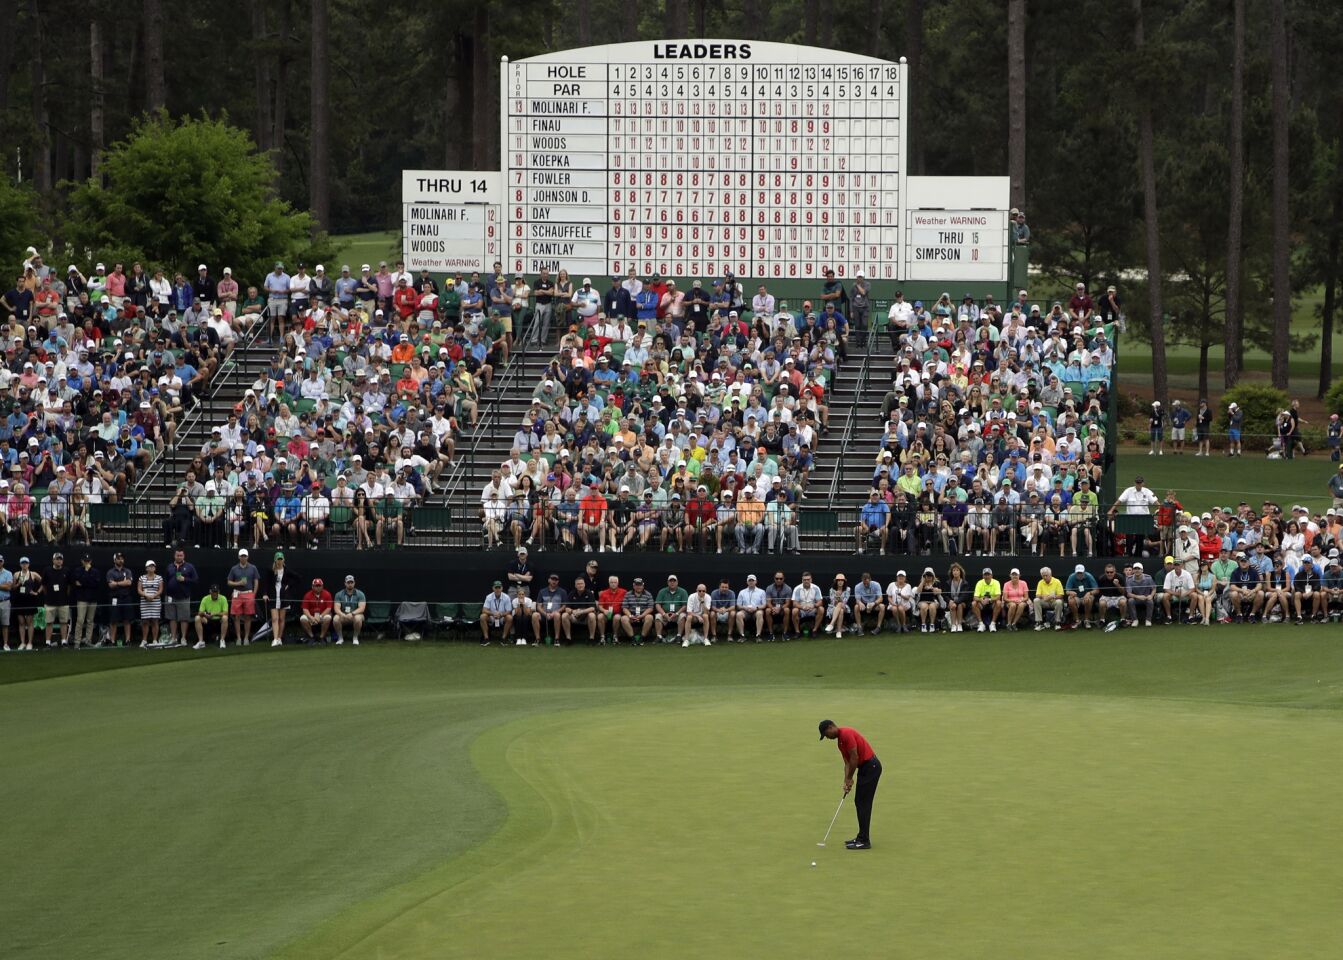 Tiger Woods putts on the 15th hole during the final round for the Masters golf tournament Sunday in Augusta, Ga.